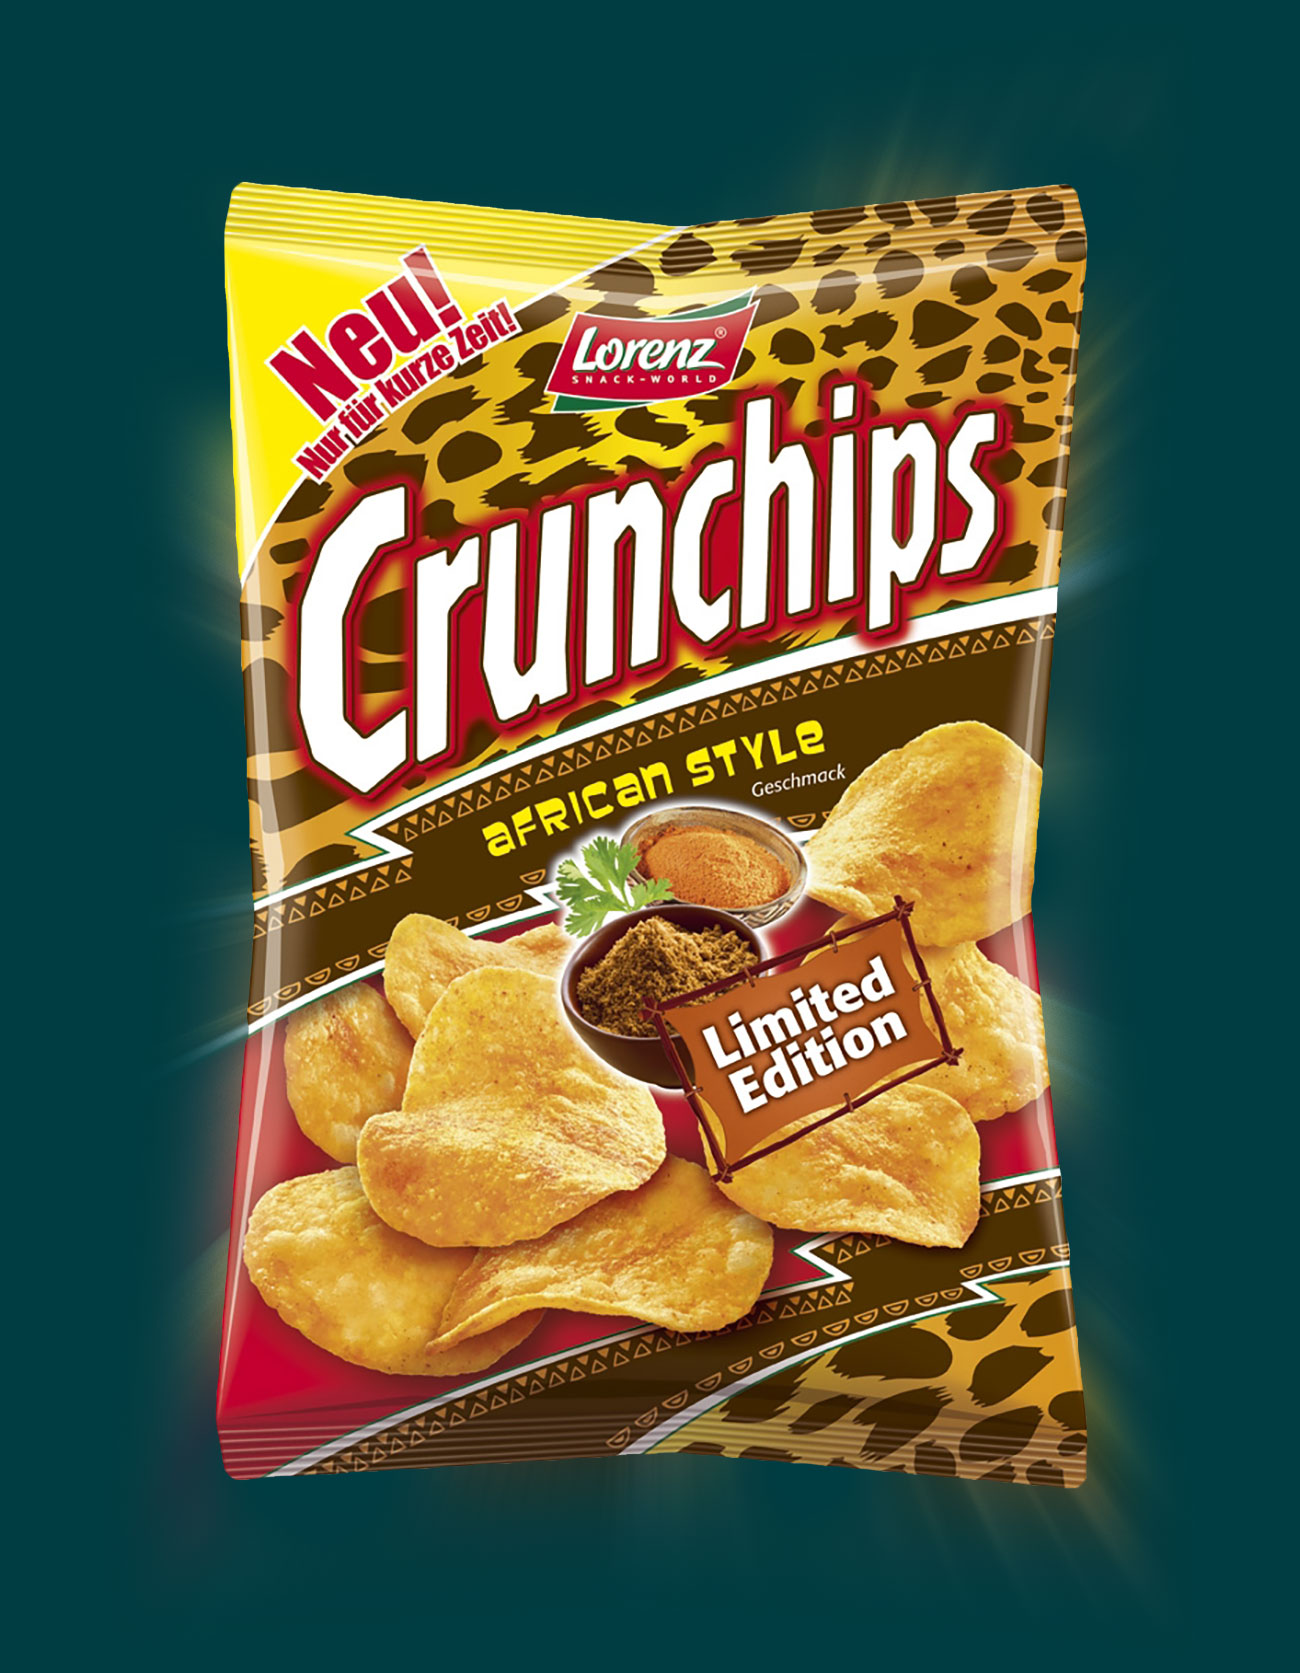 Crunchips Packaging Design Limited Edition